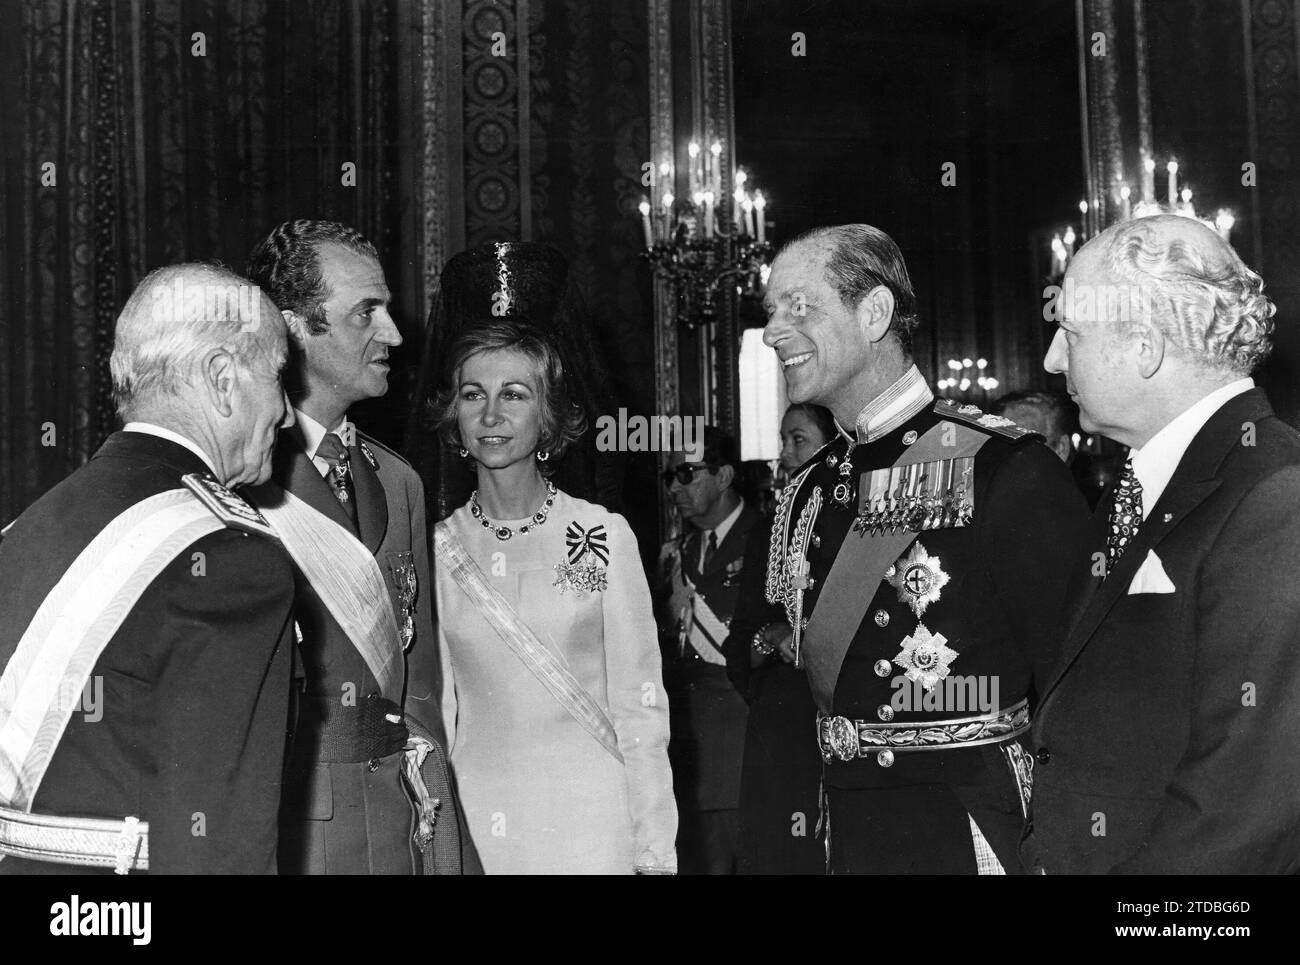 11/27/1975. Acts of exaltation to the Crown. The Monarchs Converse with the Duke of Edinburgh and the President of Germany, Walter Scheel, during the reception offered at the royal palace on the occasion of the official proclamation of Juan Carlos I as King of Spain. Credit: Album / Archivo ABC Stock Photo